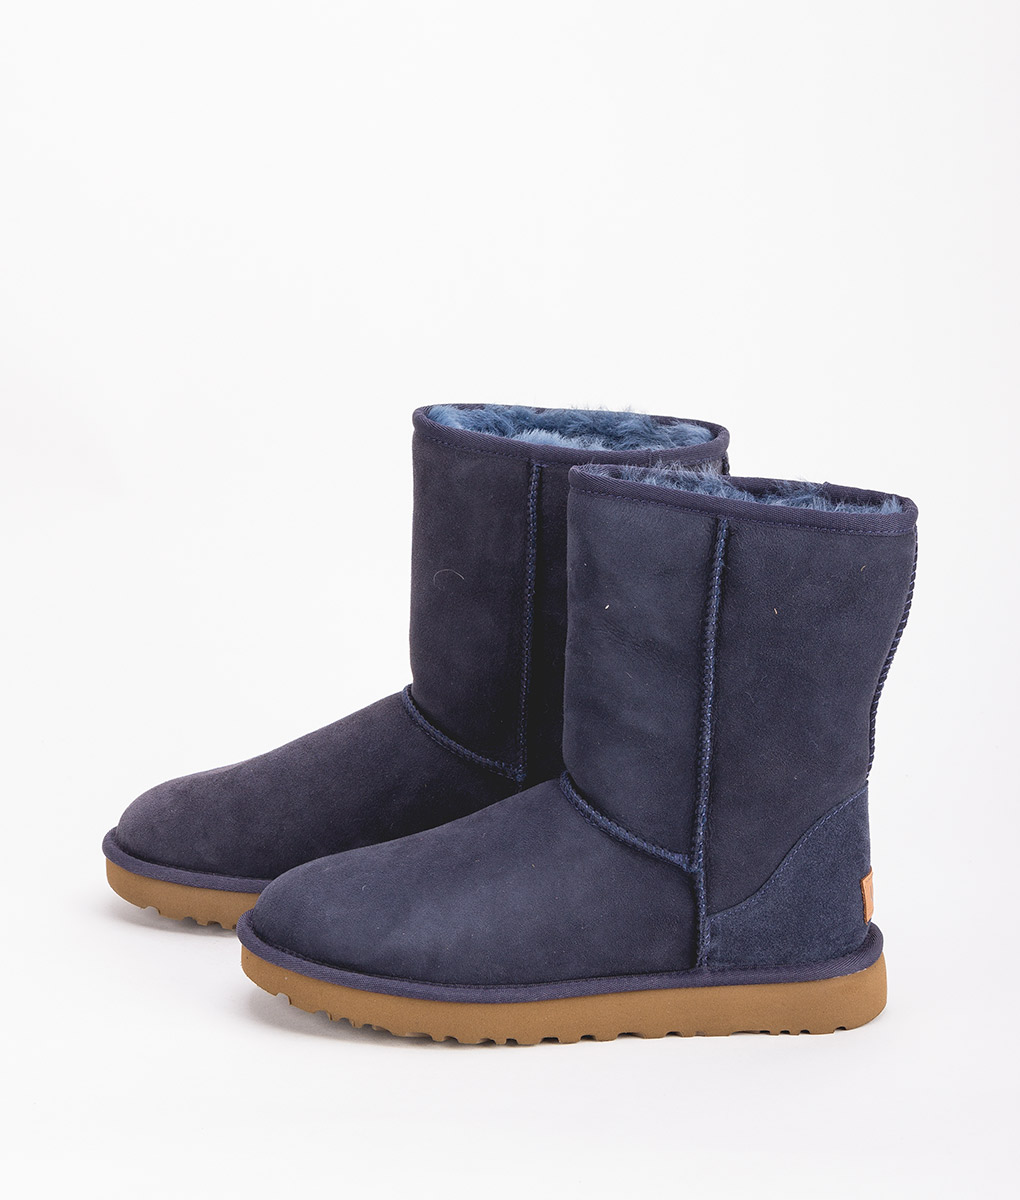 womens navy ugg boots